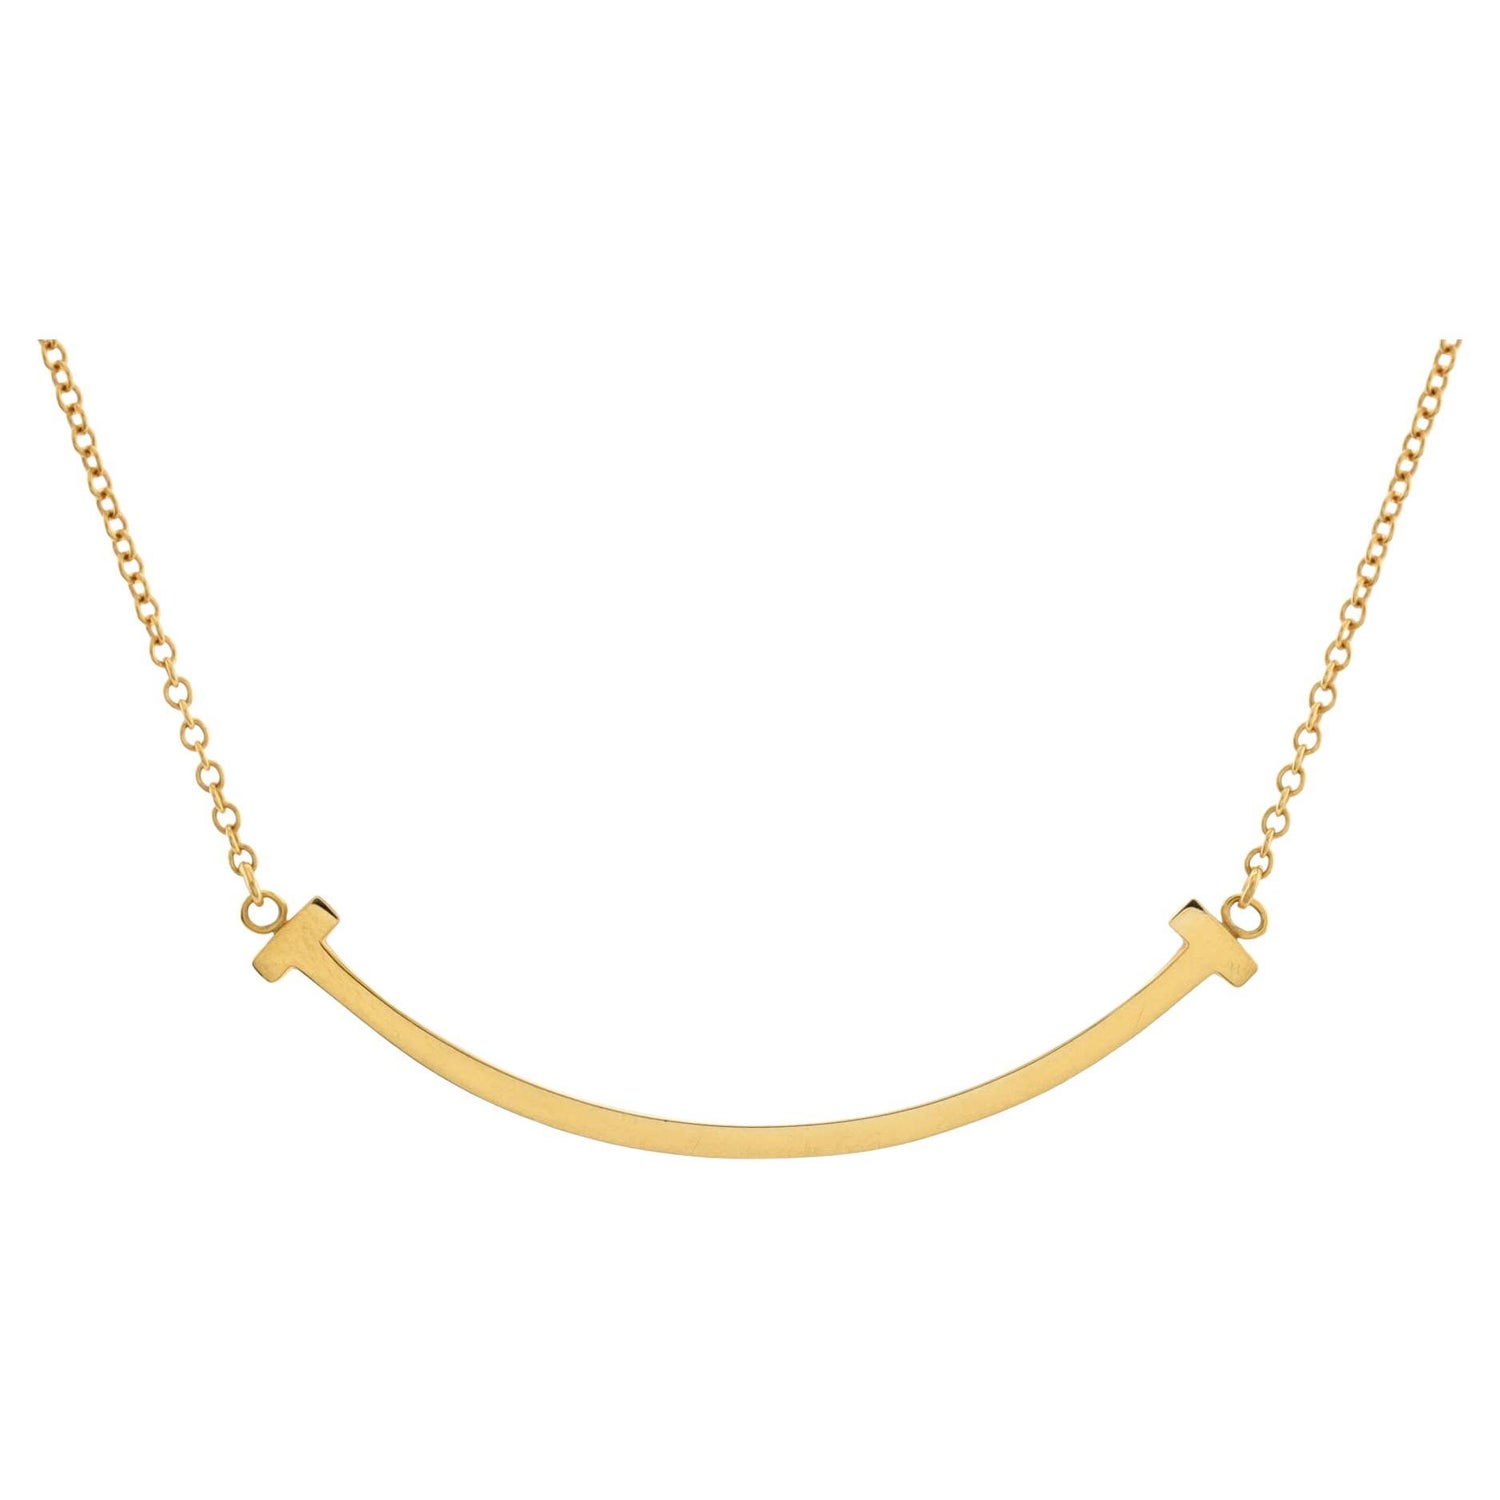 Tiffany T Smile Pendant in Yellow Gold with Diamonds, Small